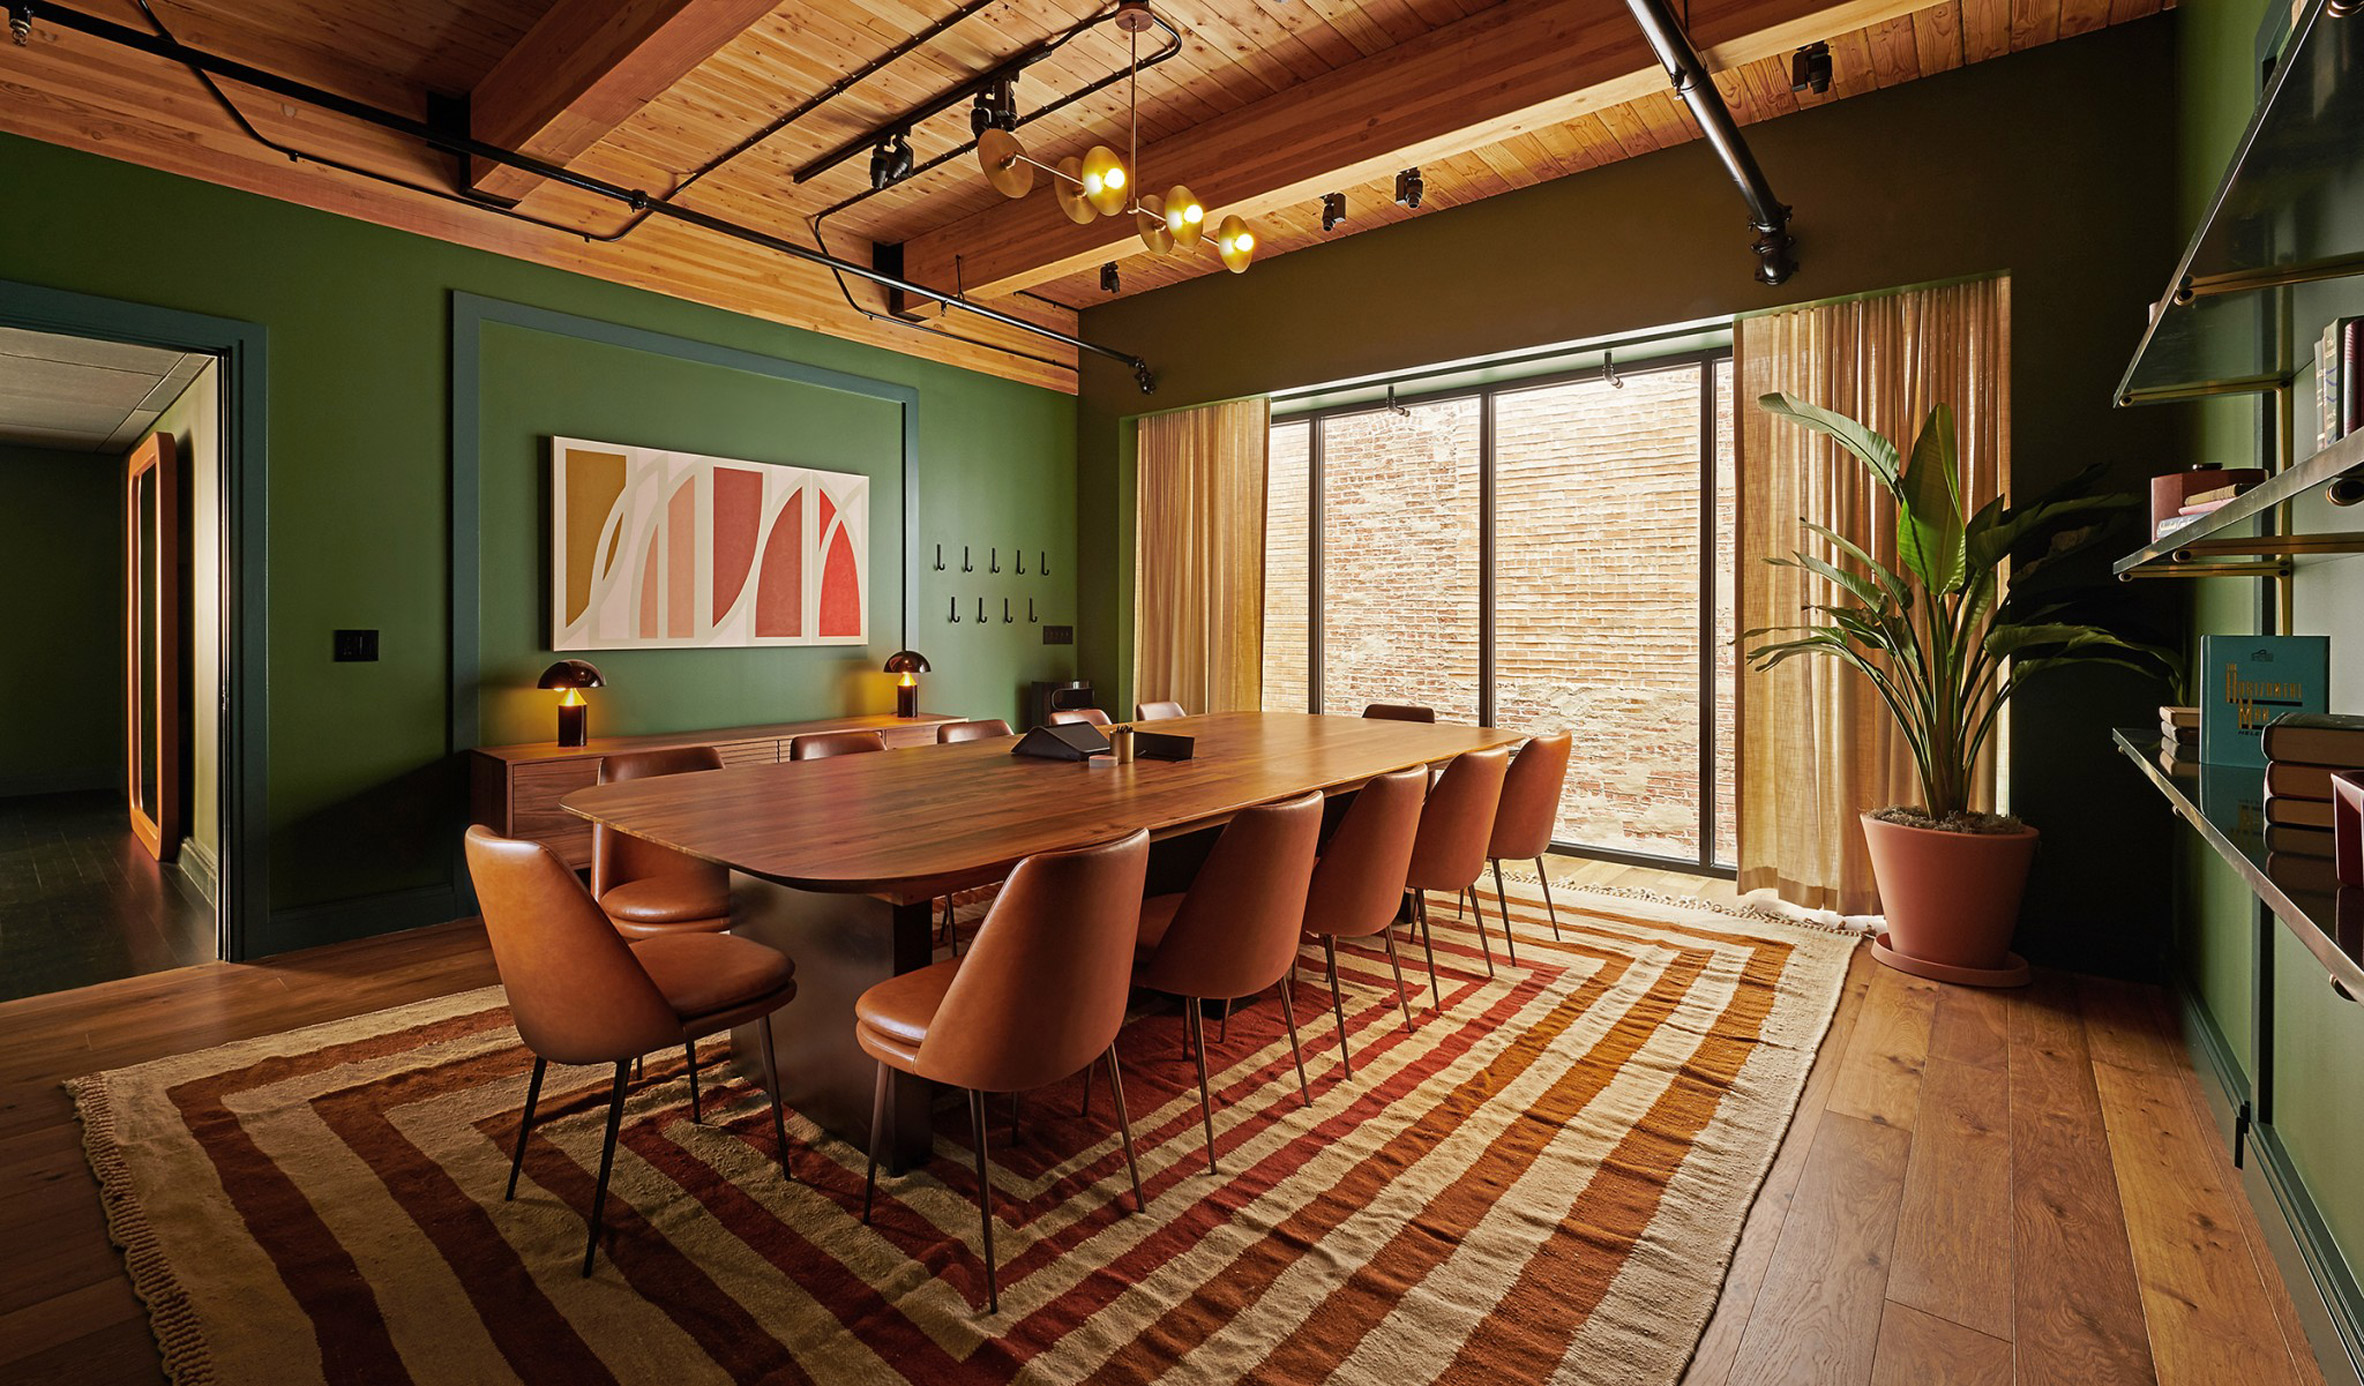 Meeting room in Chief Chicago clubhouse with long wooden table, leather chairs and geometric pattern rug